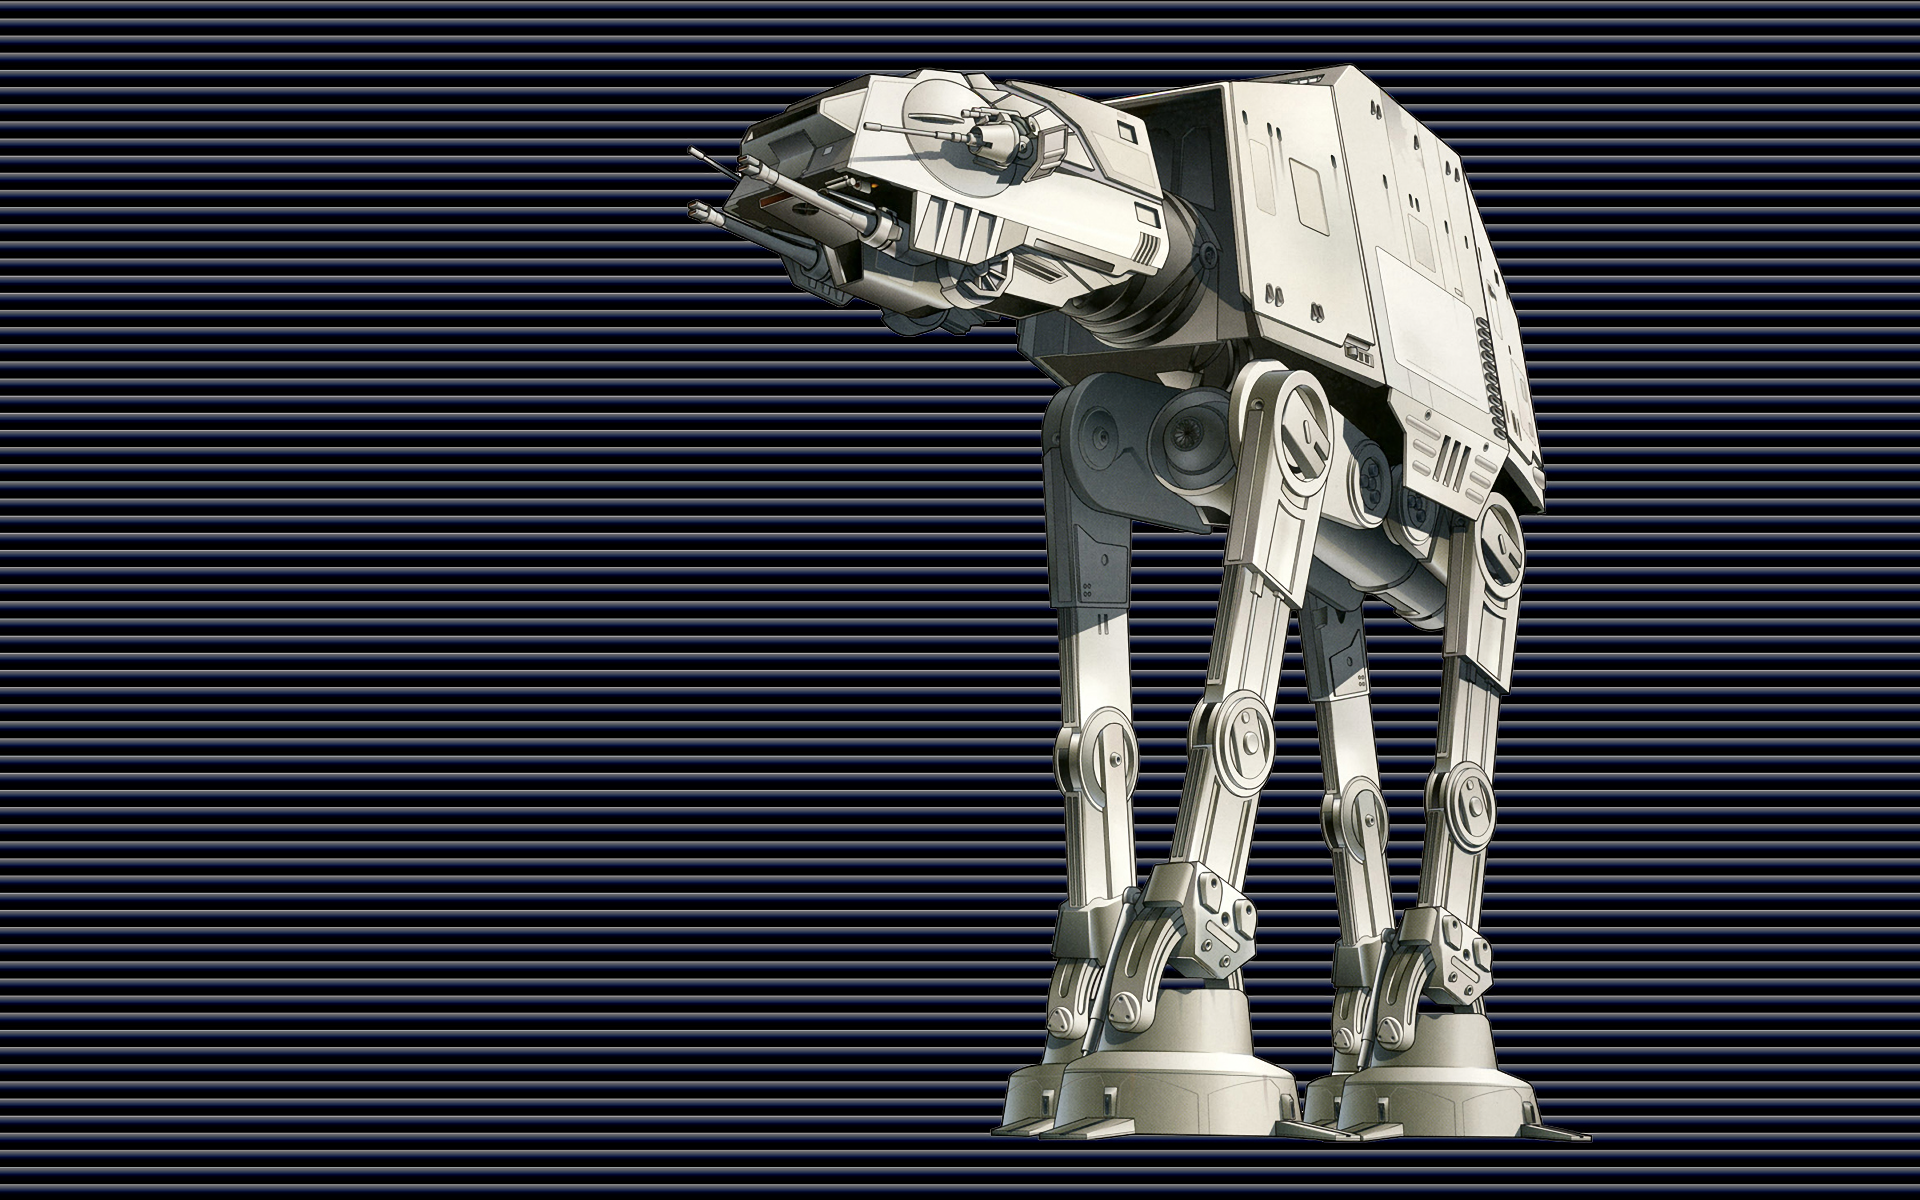 AT-AT Walker in high-definition.